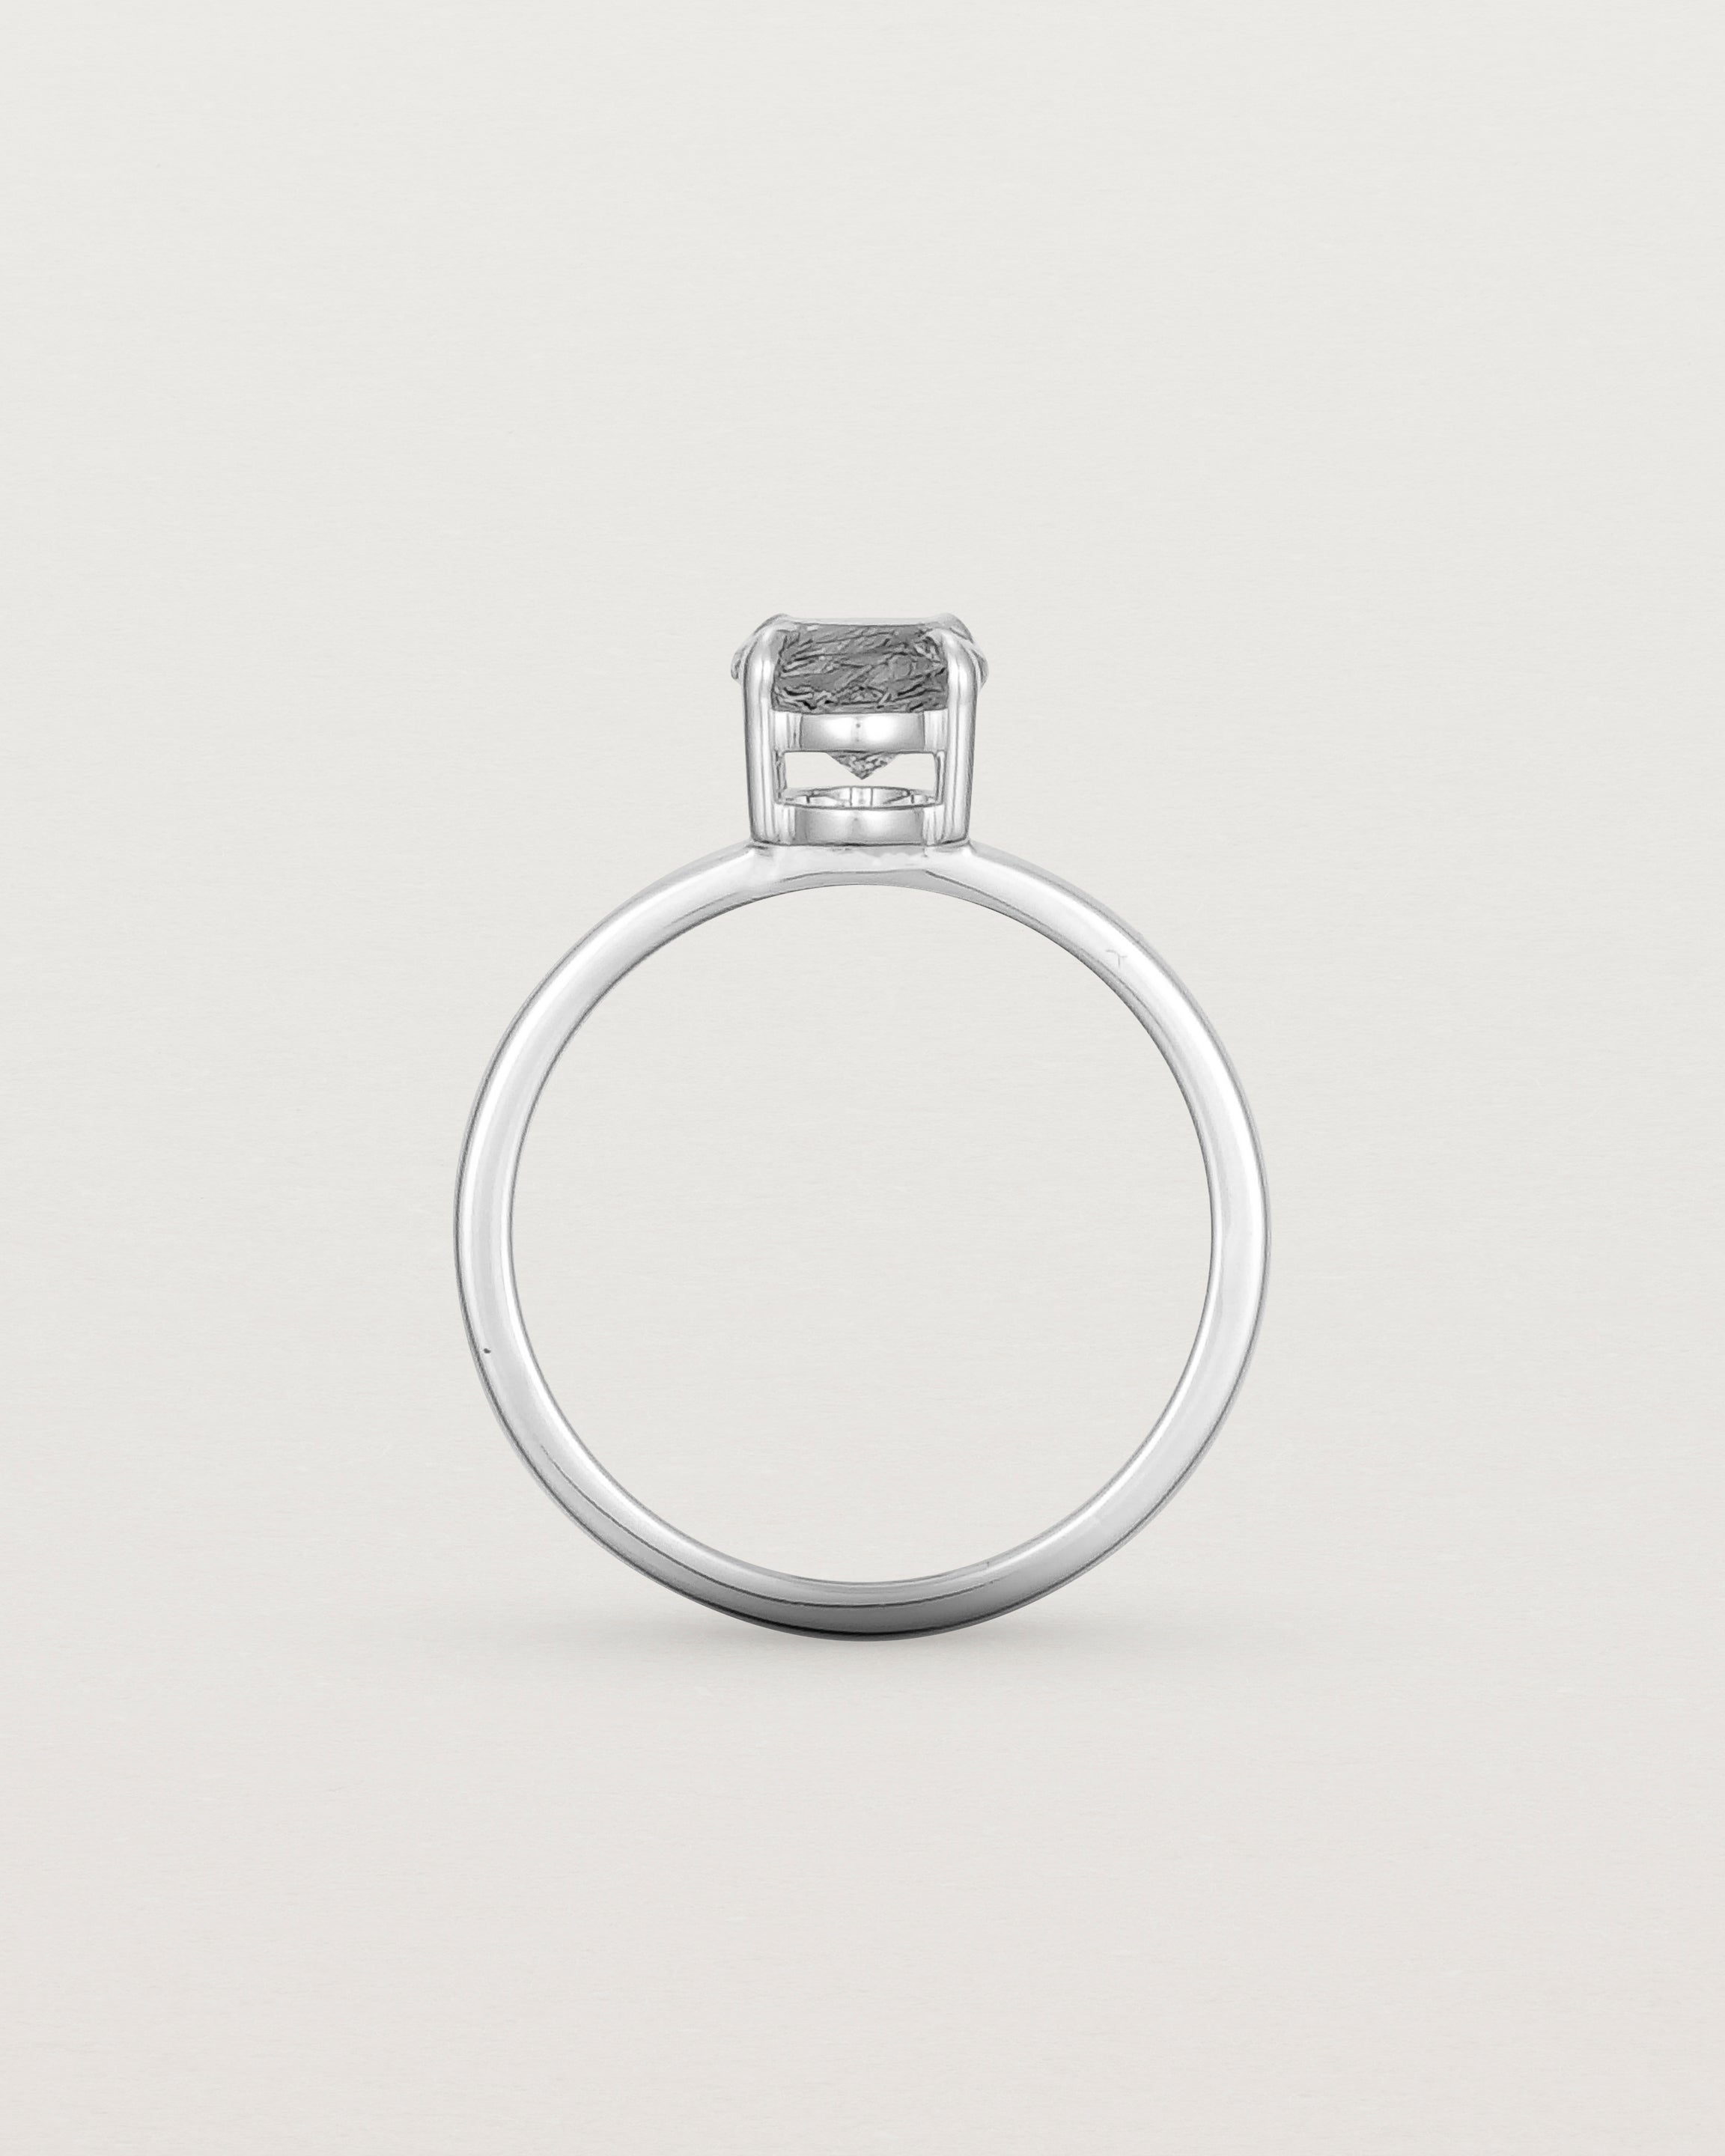 Standing view of the Una Oval Solitaire | Tourmalinated Quartz | White Gold.